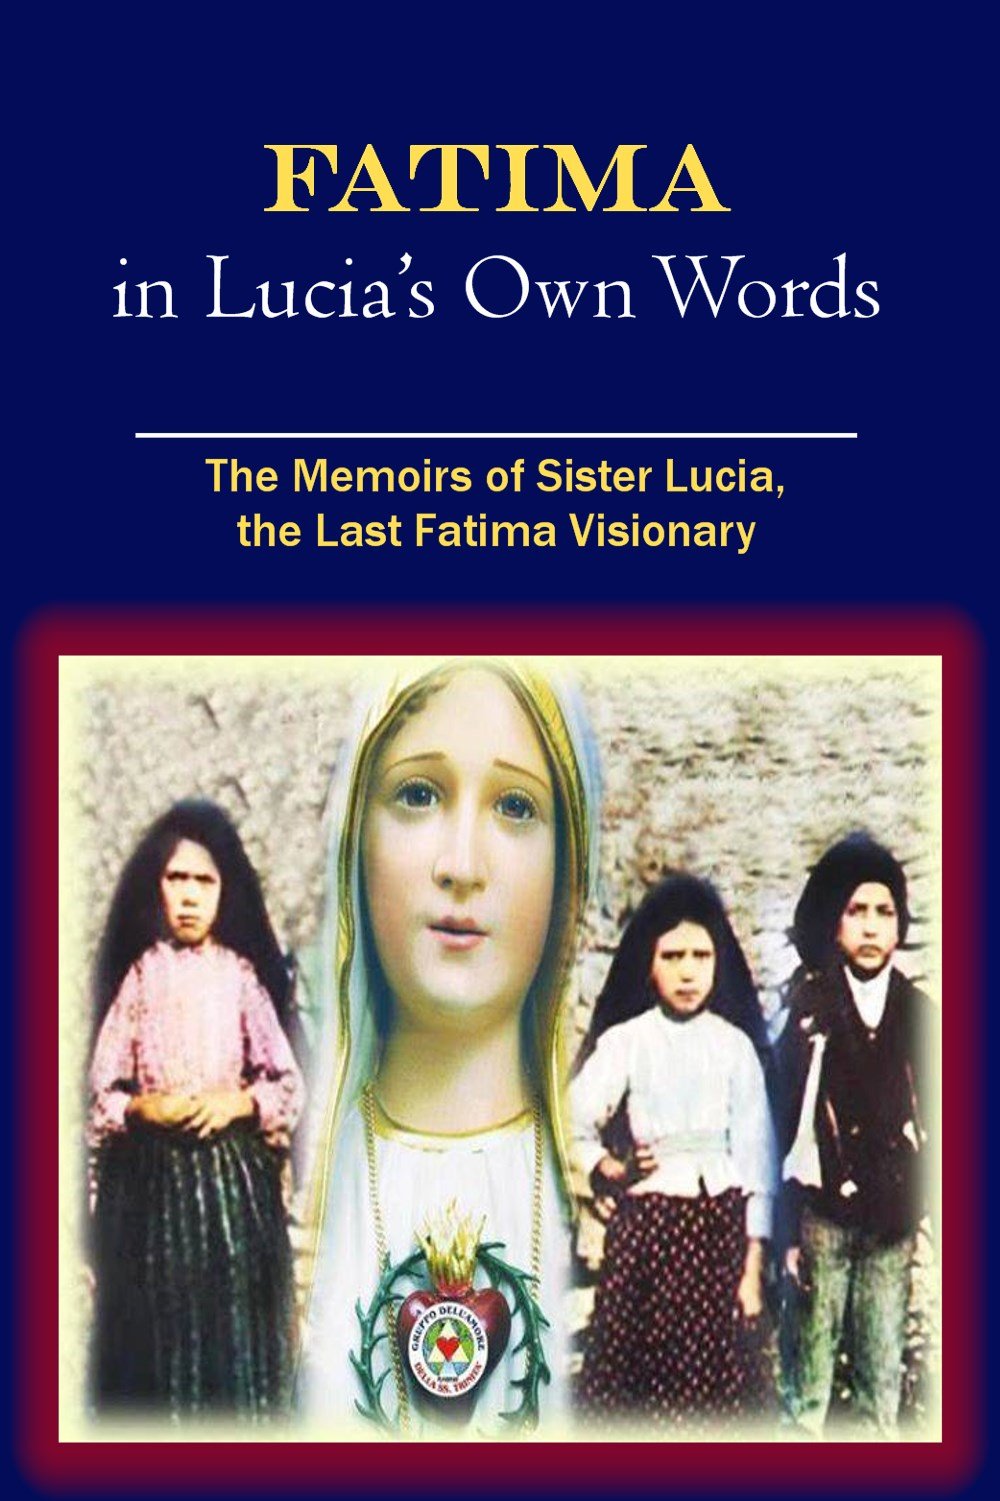 Fatima in Lucia's Own Words: The Memoirs of Sister Lucia, the Last Fatima Visionary